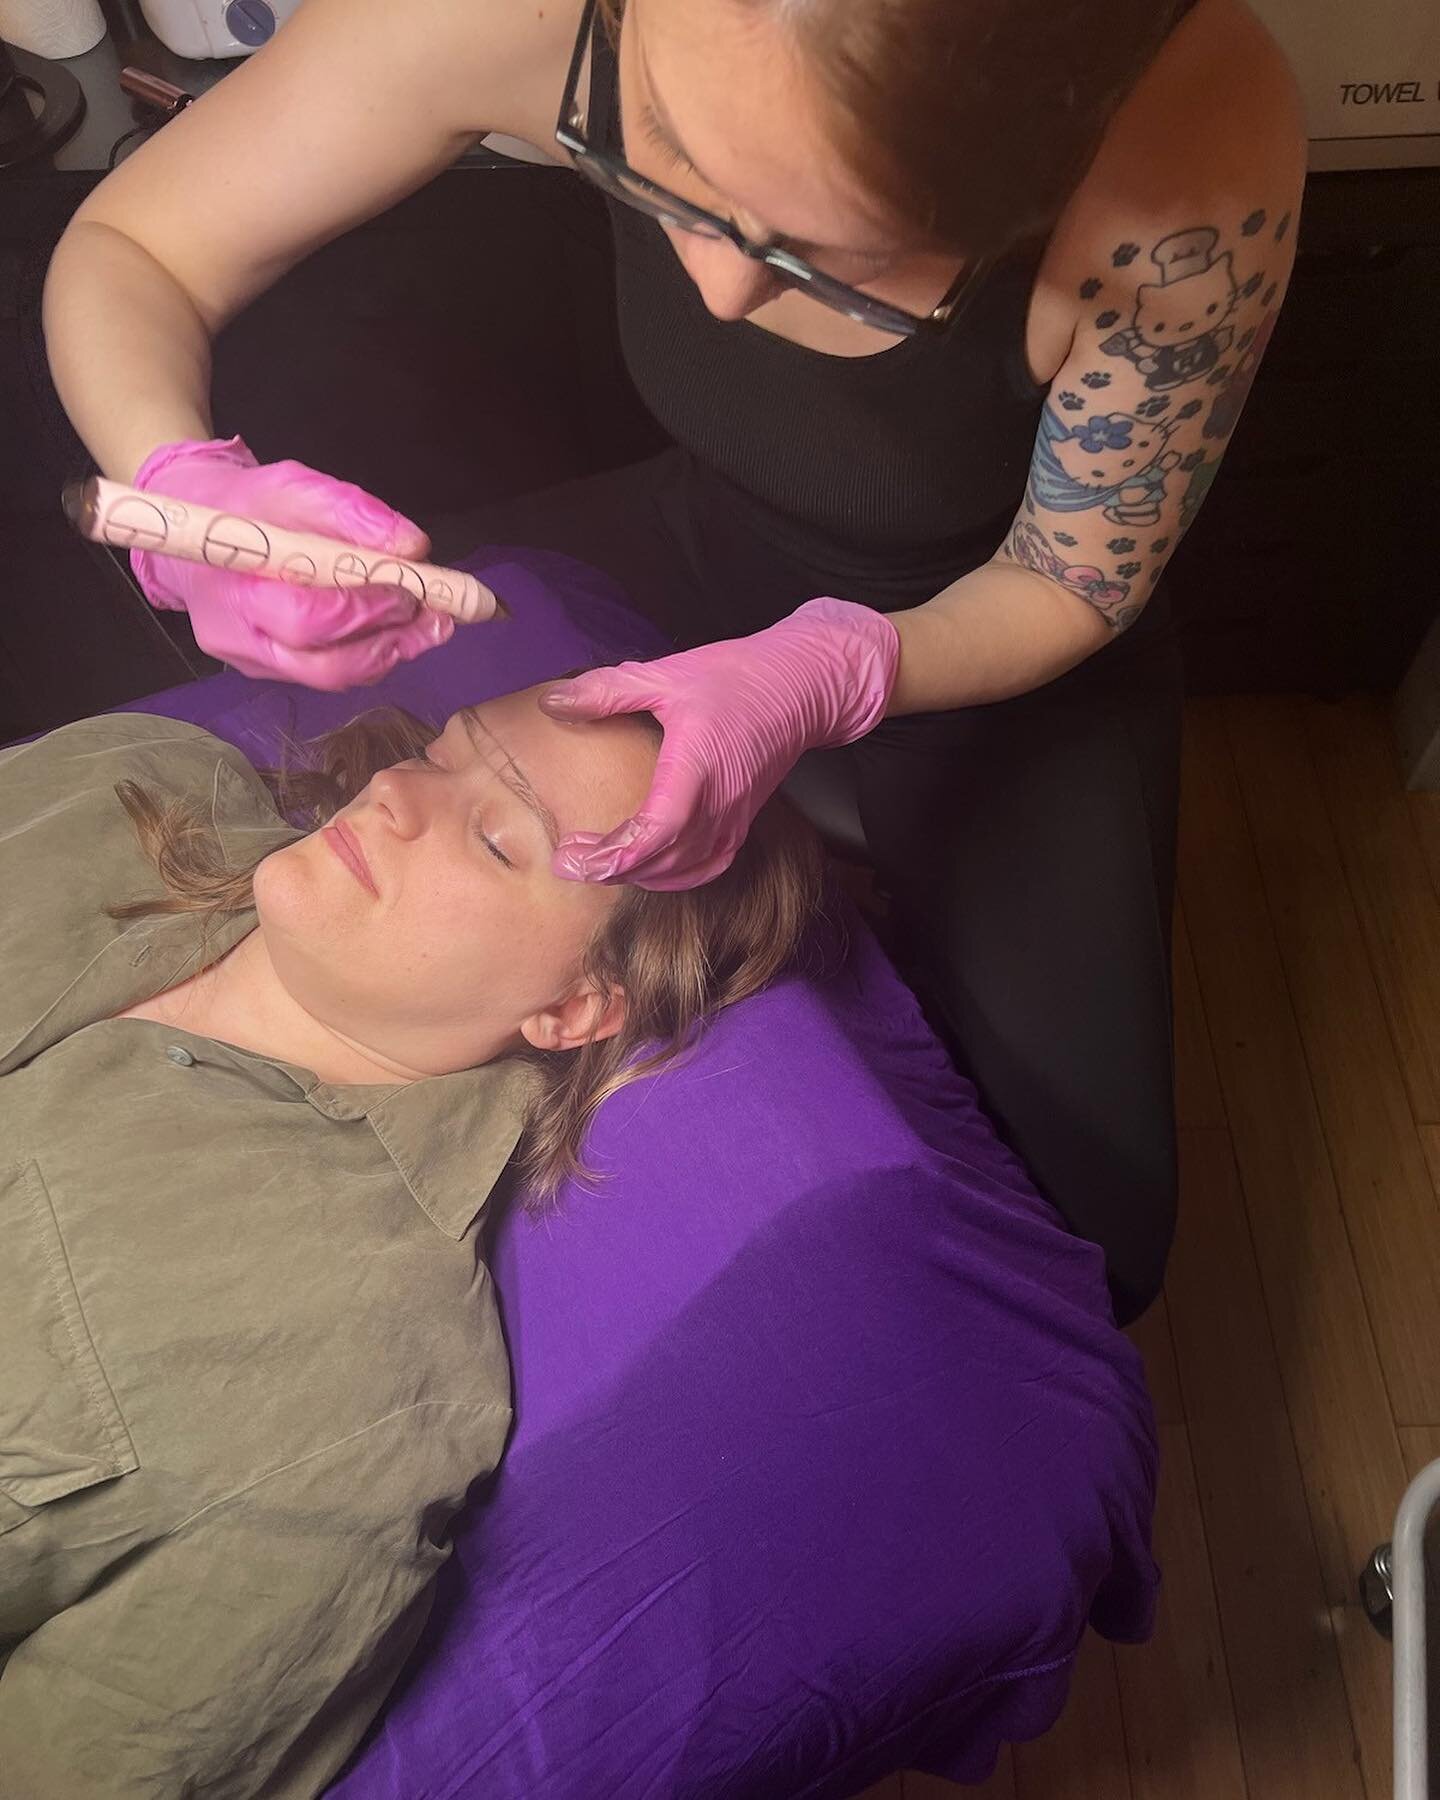 Sydney taking Microblading to the next level🤩🙌She is crushing it with those brows!! Her lovely model Chellie looked fabulous with her natural and sculpted brows! We are so excited Sydney is offering these services now! Book online, DM, or contact t